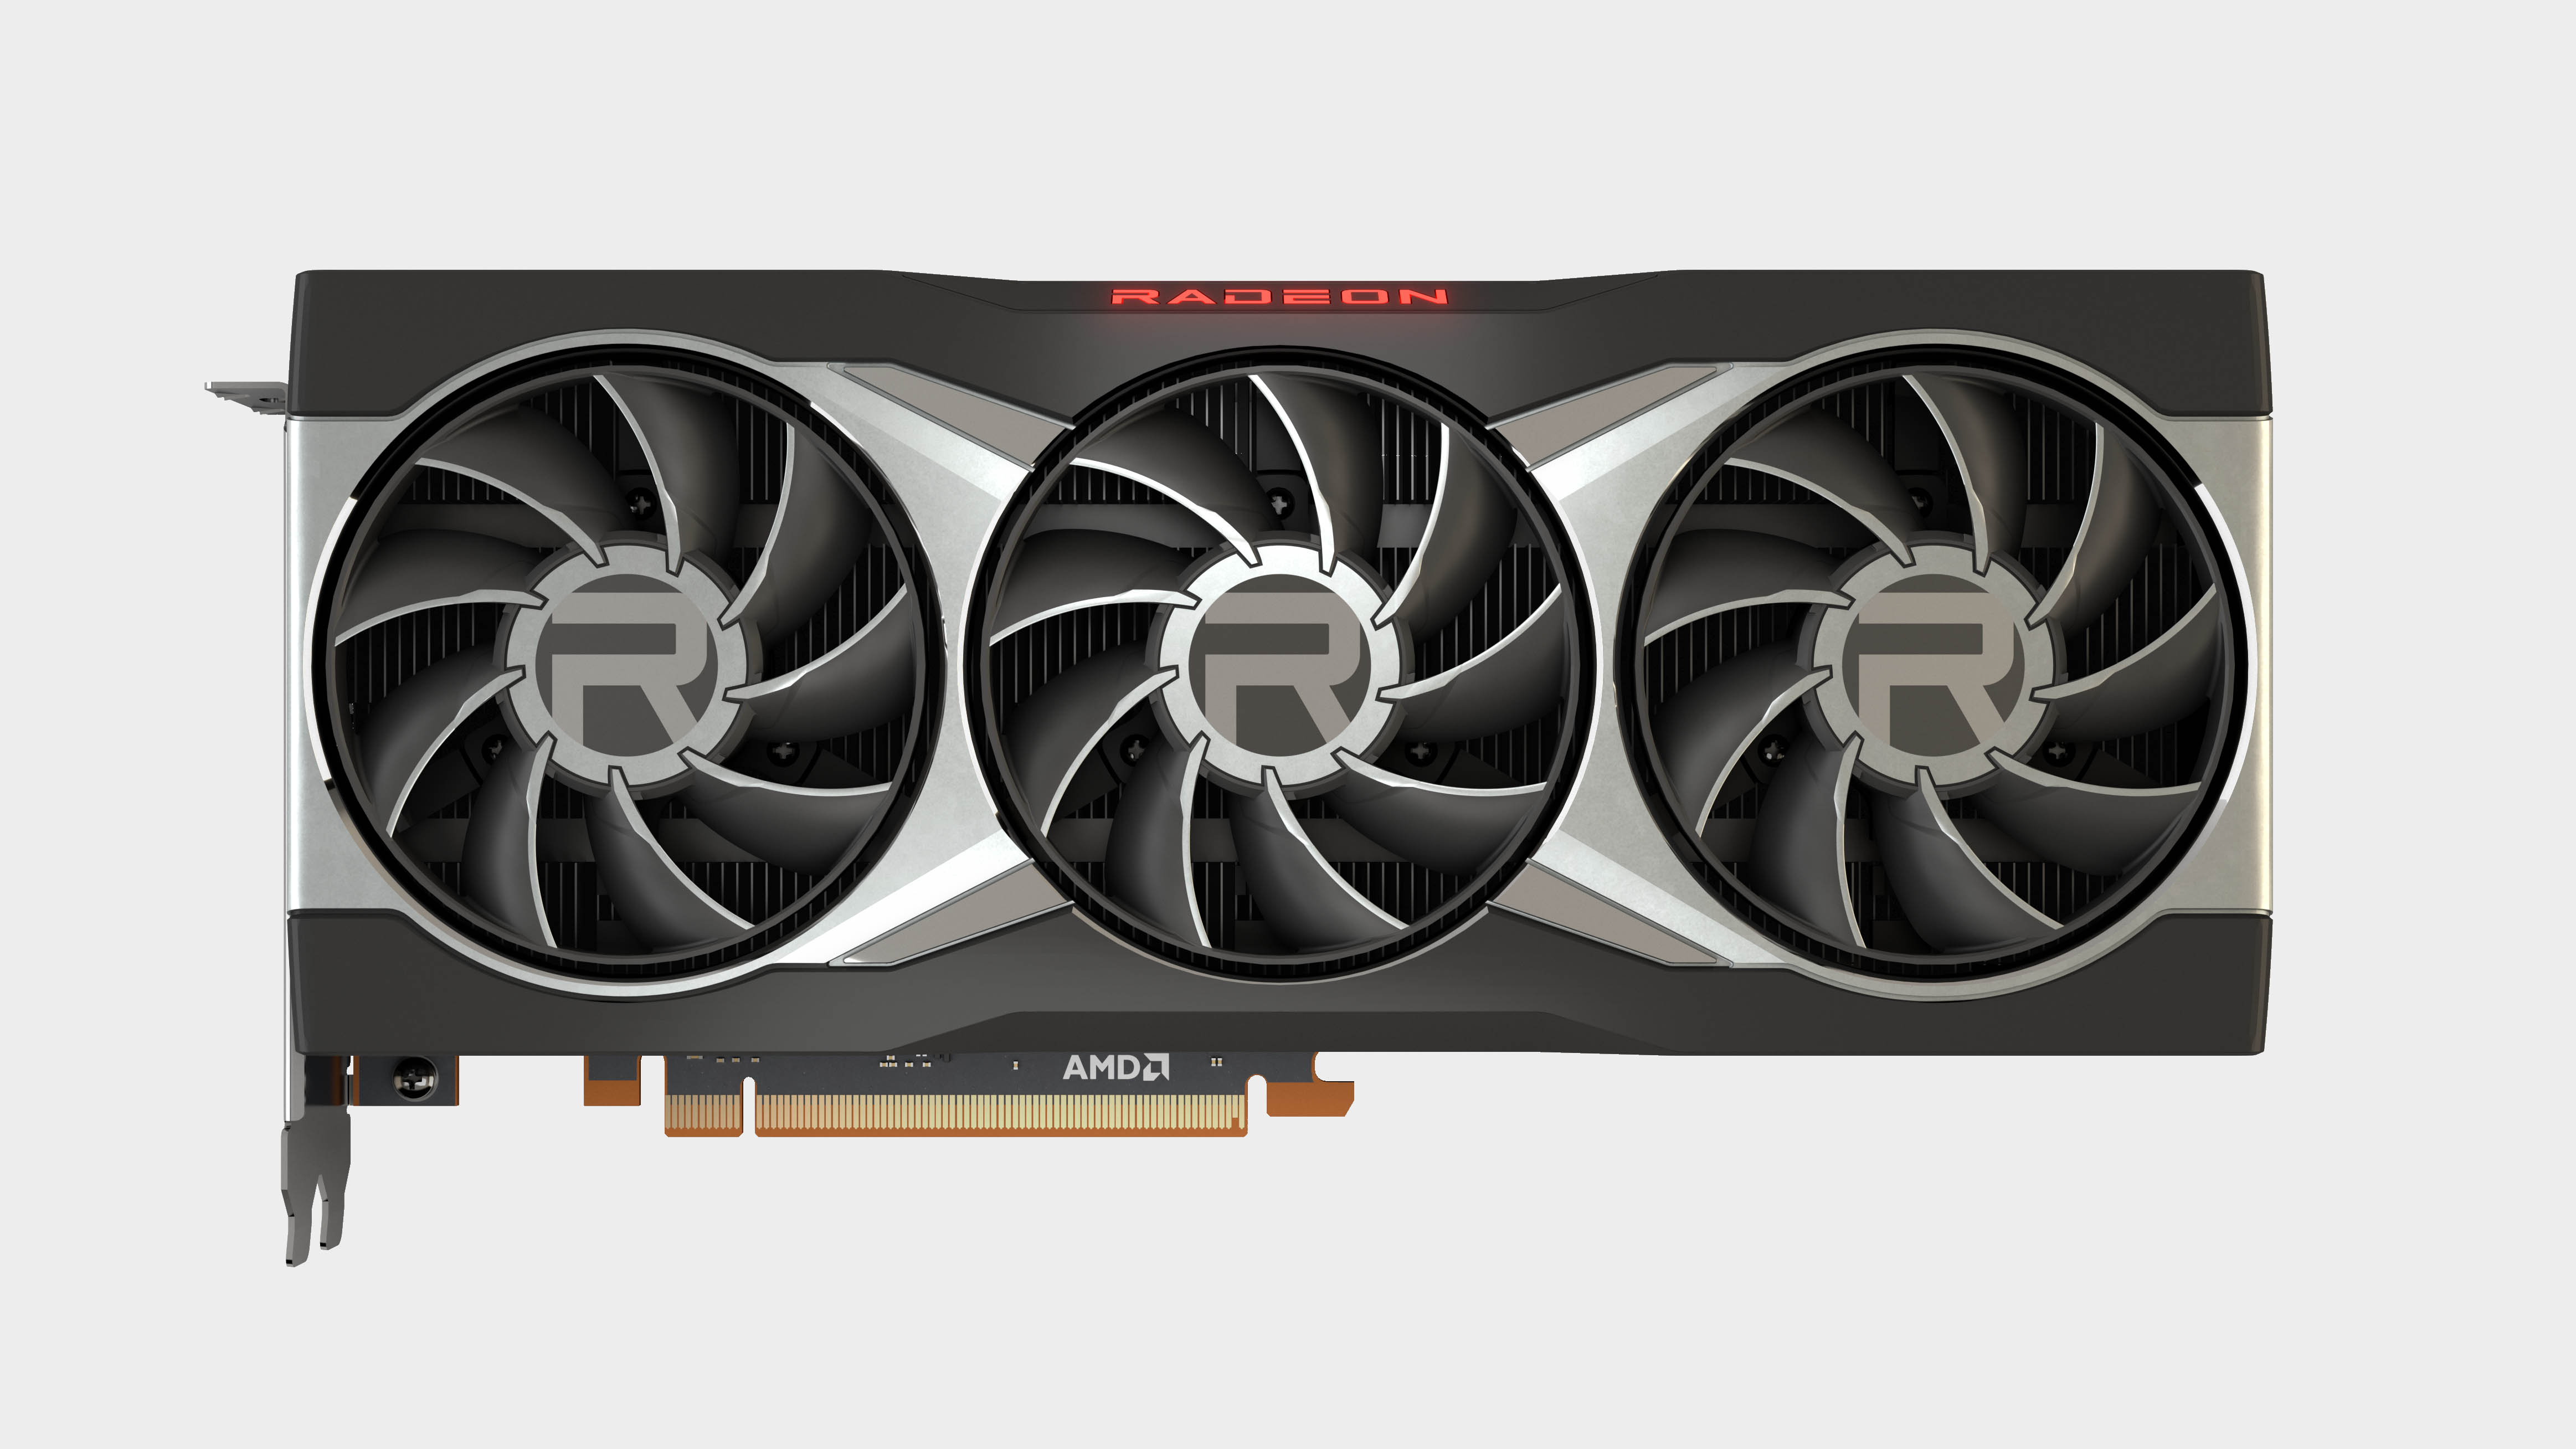 AMD Radeon RX 6900 XT graphics card render on off-white background